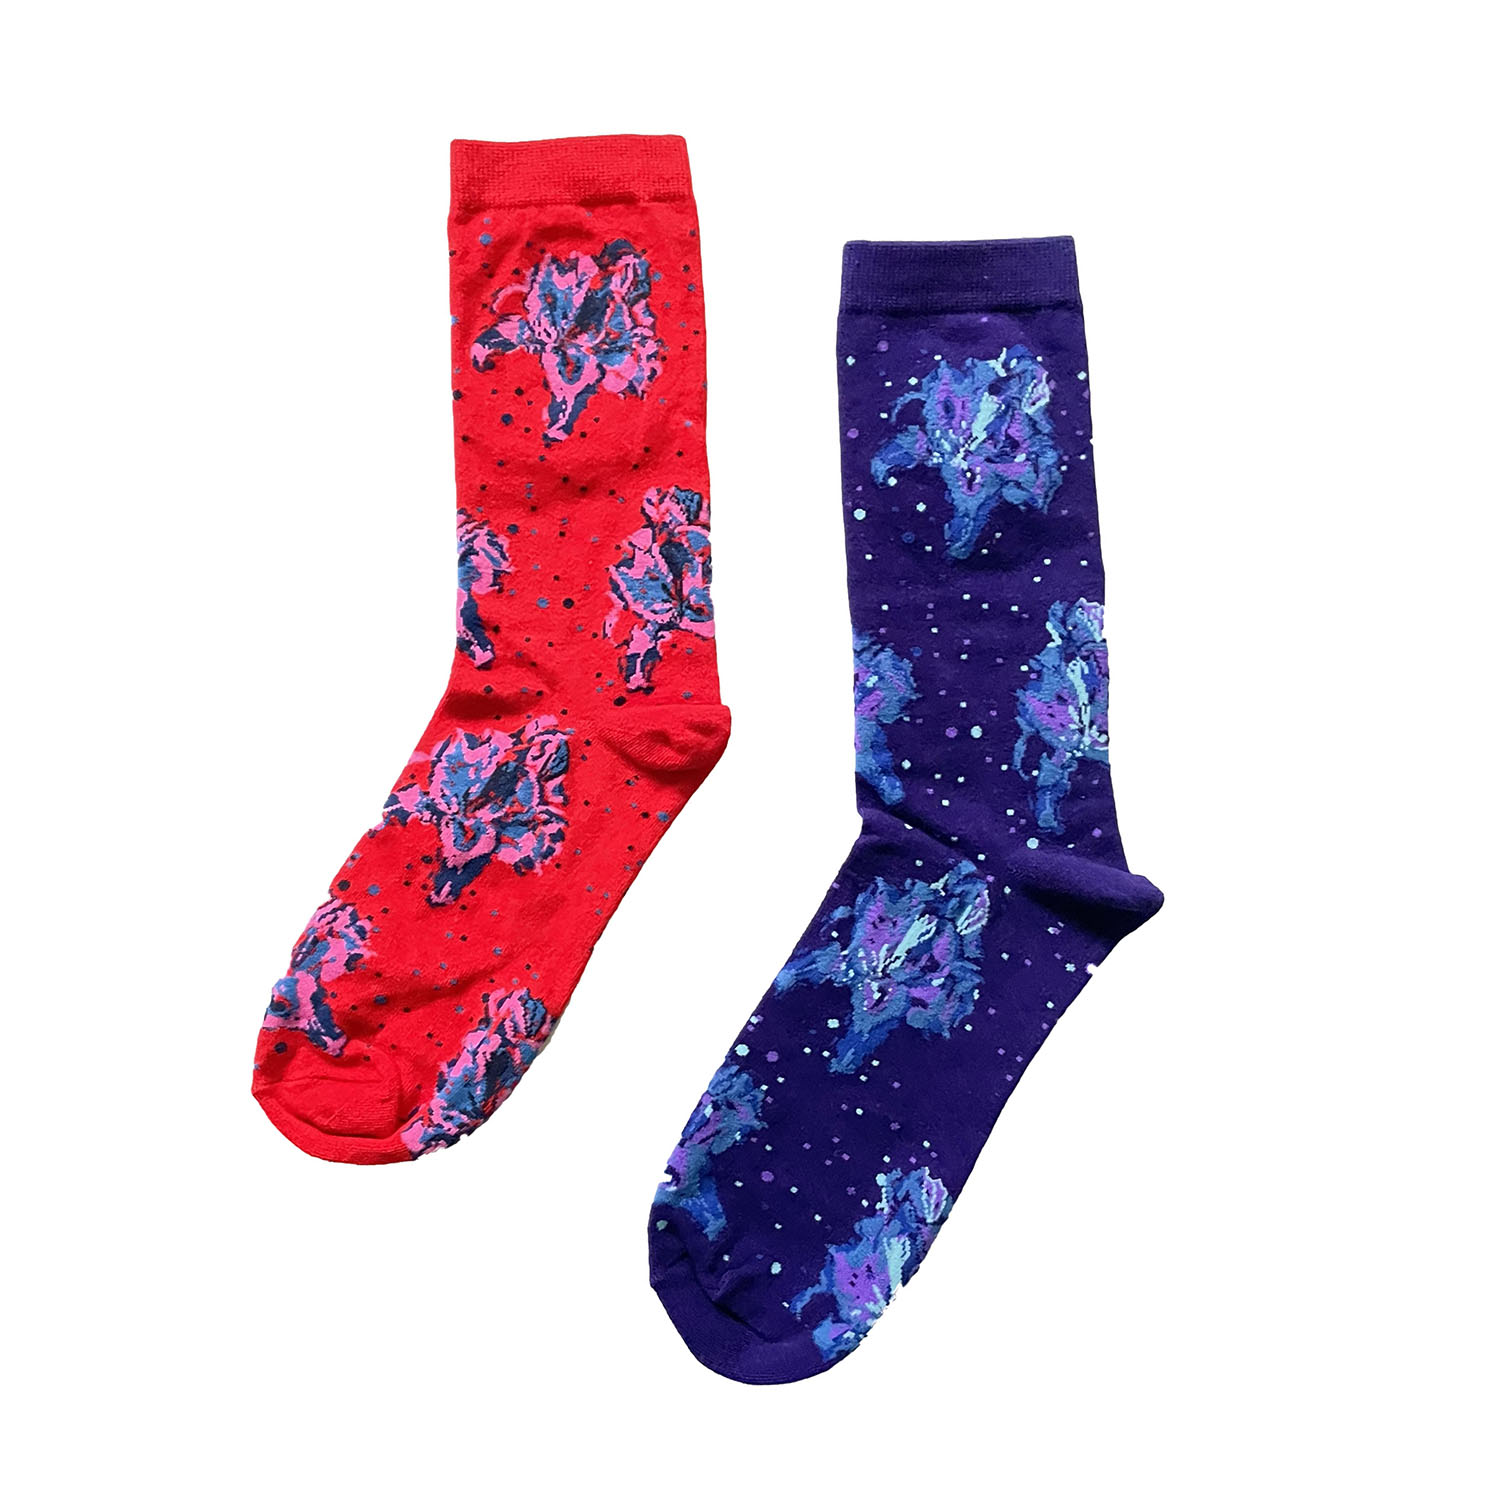 Women’s Red / Pink / Purple Hello Flower Socks - Chrismtas Vibes Two Pack One Size Arto.